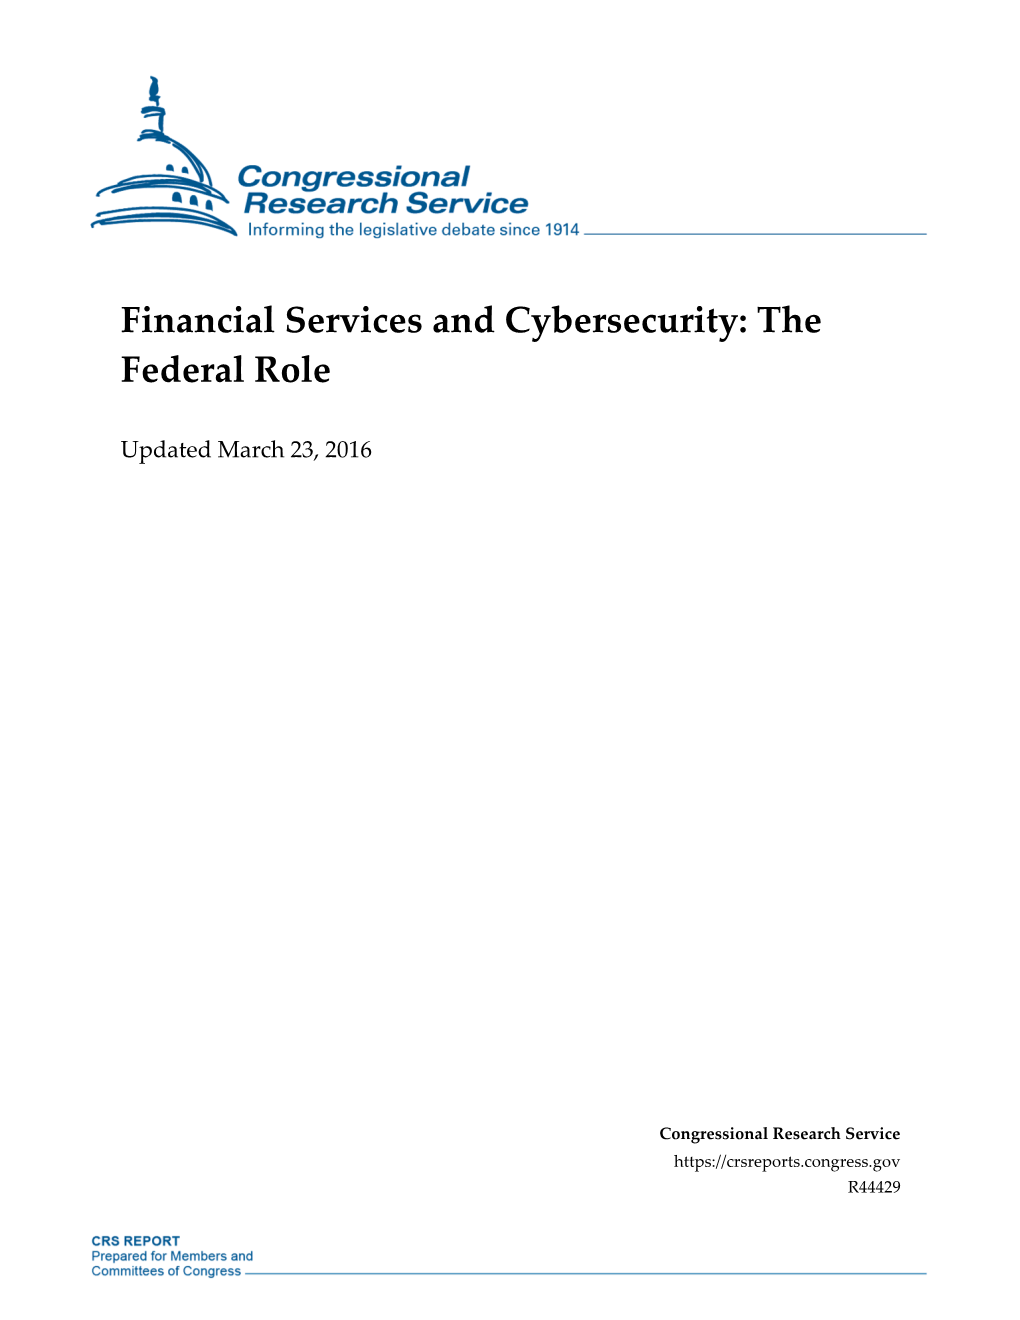 Financial Services and Cybersecurity: the Federal Role